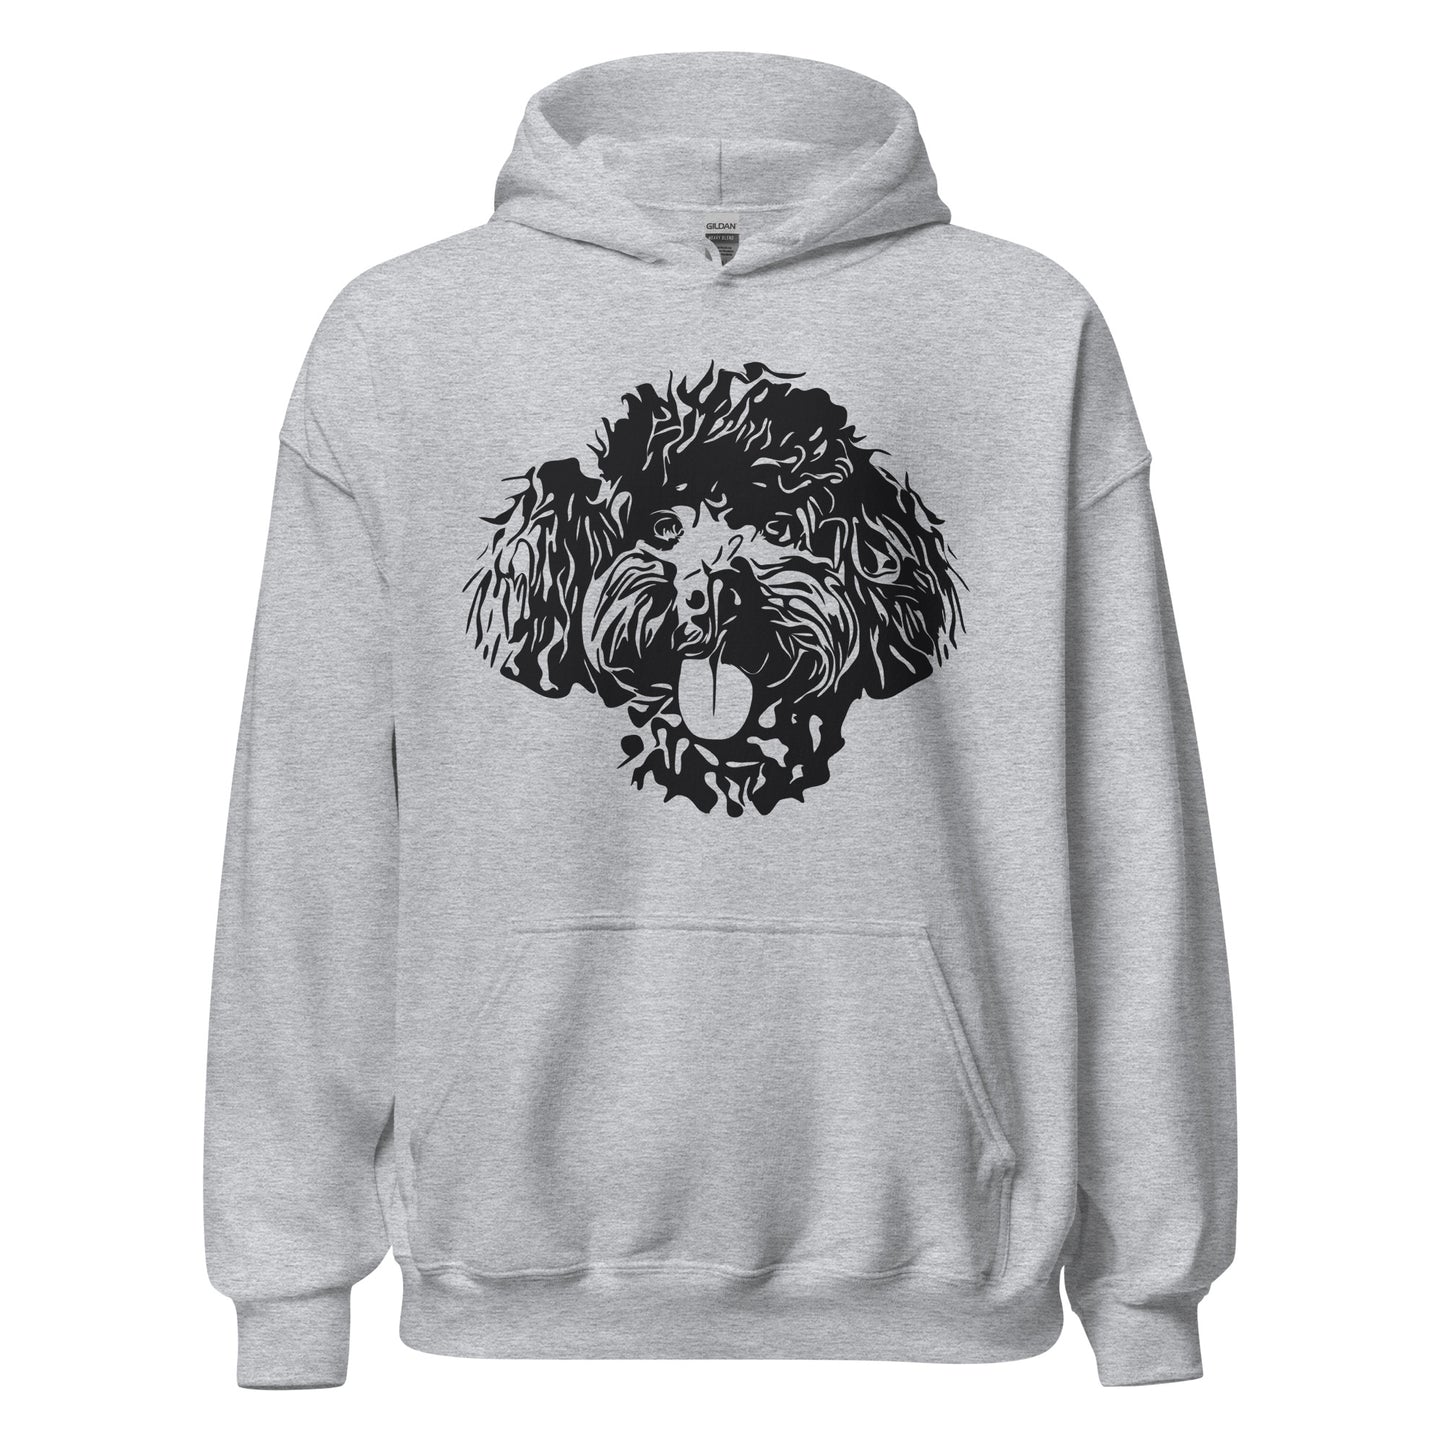 Black Toy Poodle face silhouette on unisex sport grey hoodie